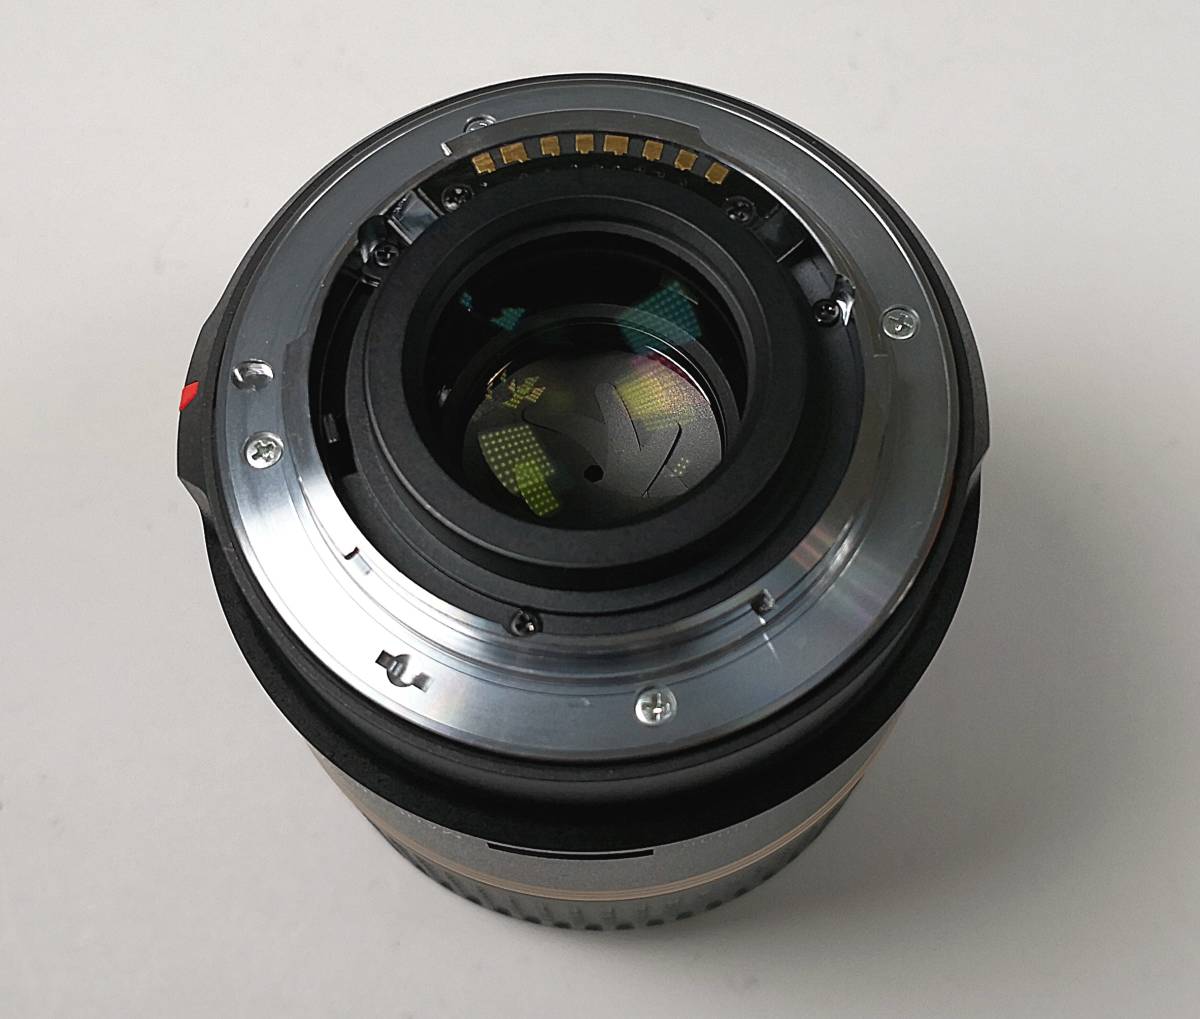 TAMRON 単焦点マクロレンズ SP AF60mm F2 DiII MACRO 1:1 ニコン用 APS